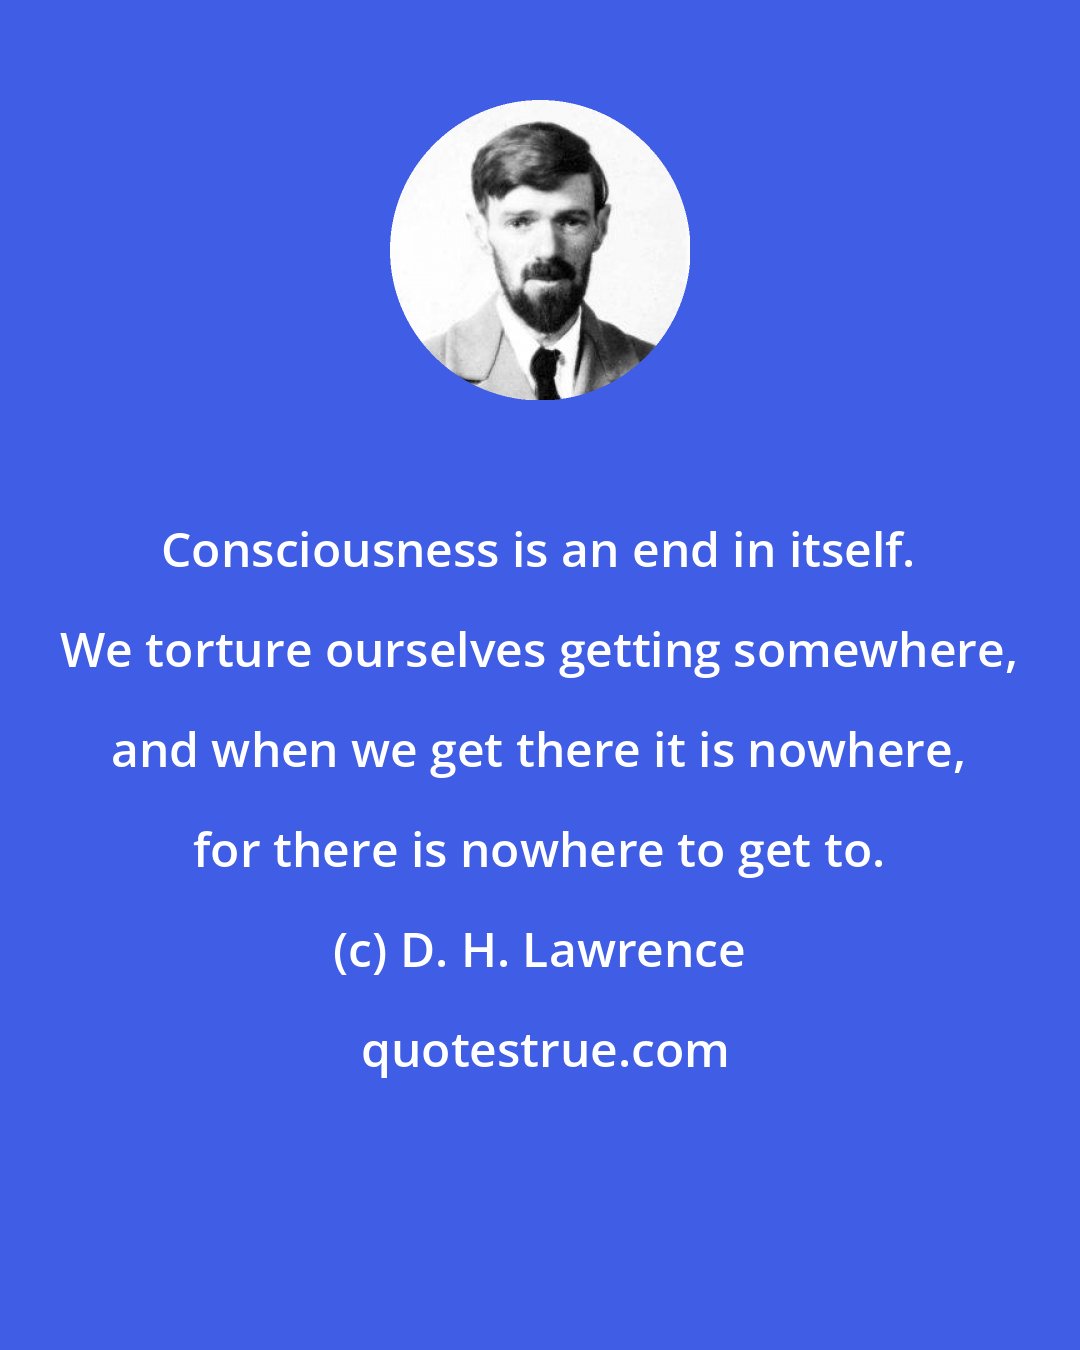 D. H. Lawrence: Consciousness is an end in itself. We torture ourselves getting somewhere, and when we get there it is nowhere, for there is nowhere to get to.